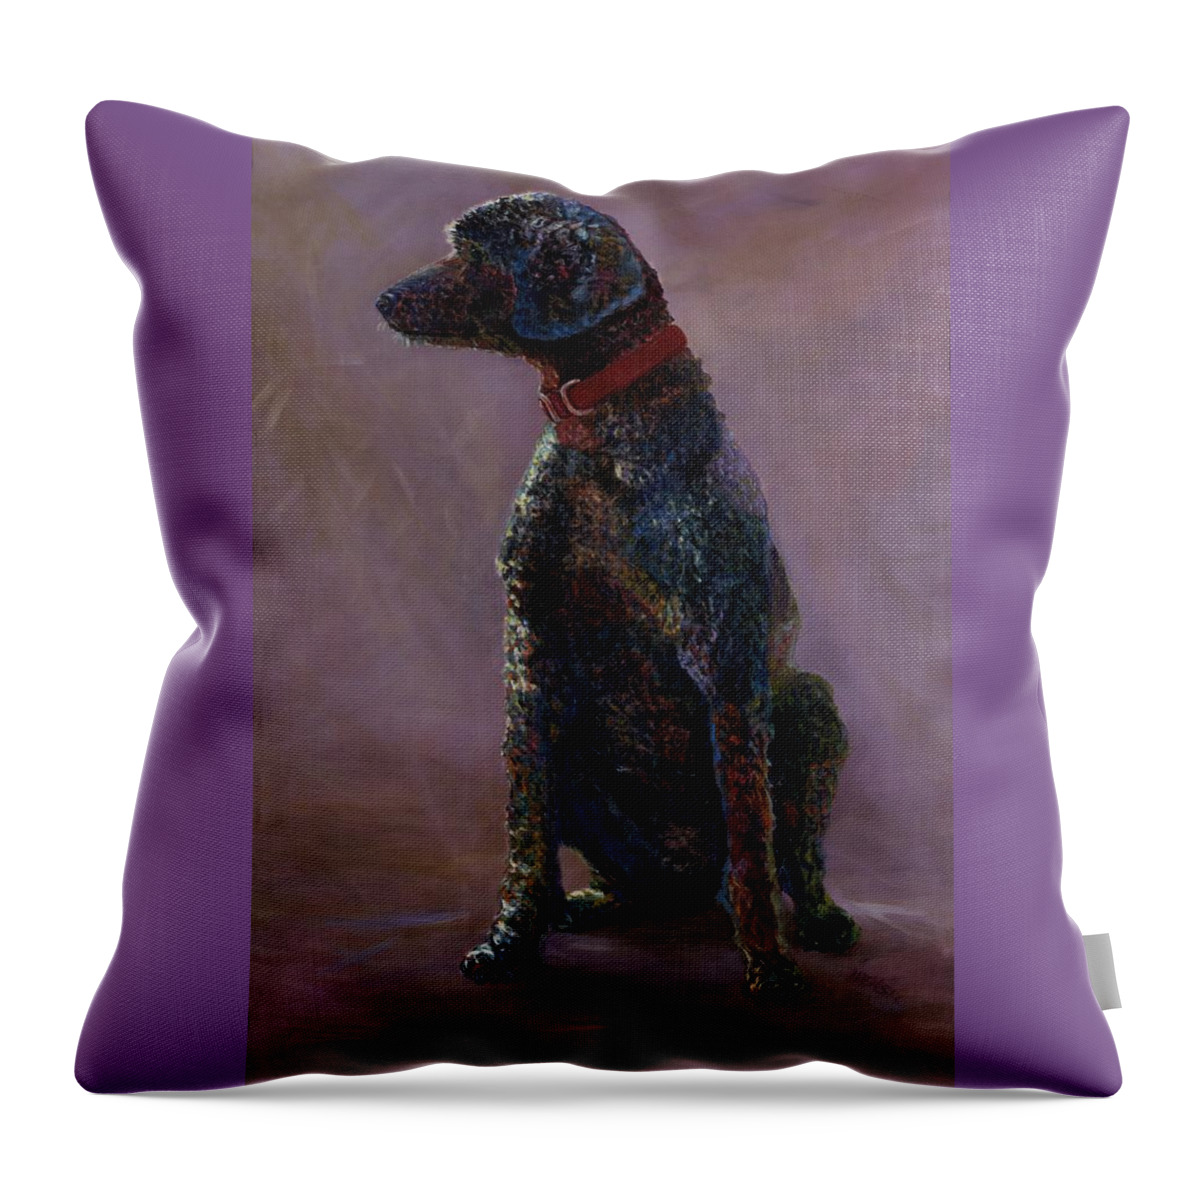 Dog Throw Pillow featuring the painting Moe by Susan Hensel